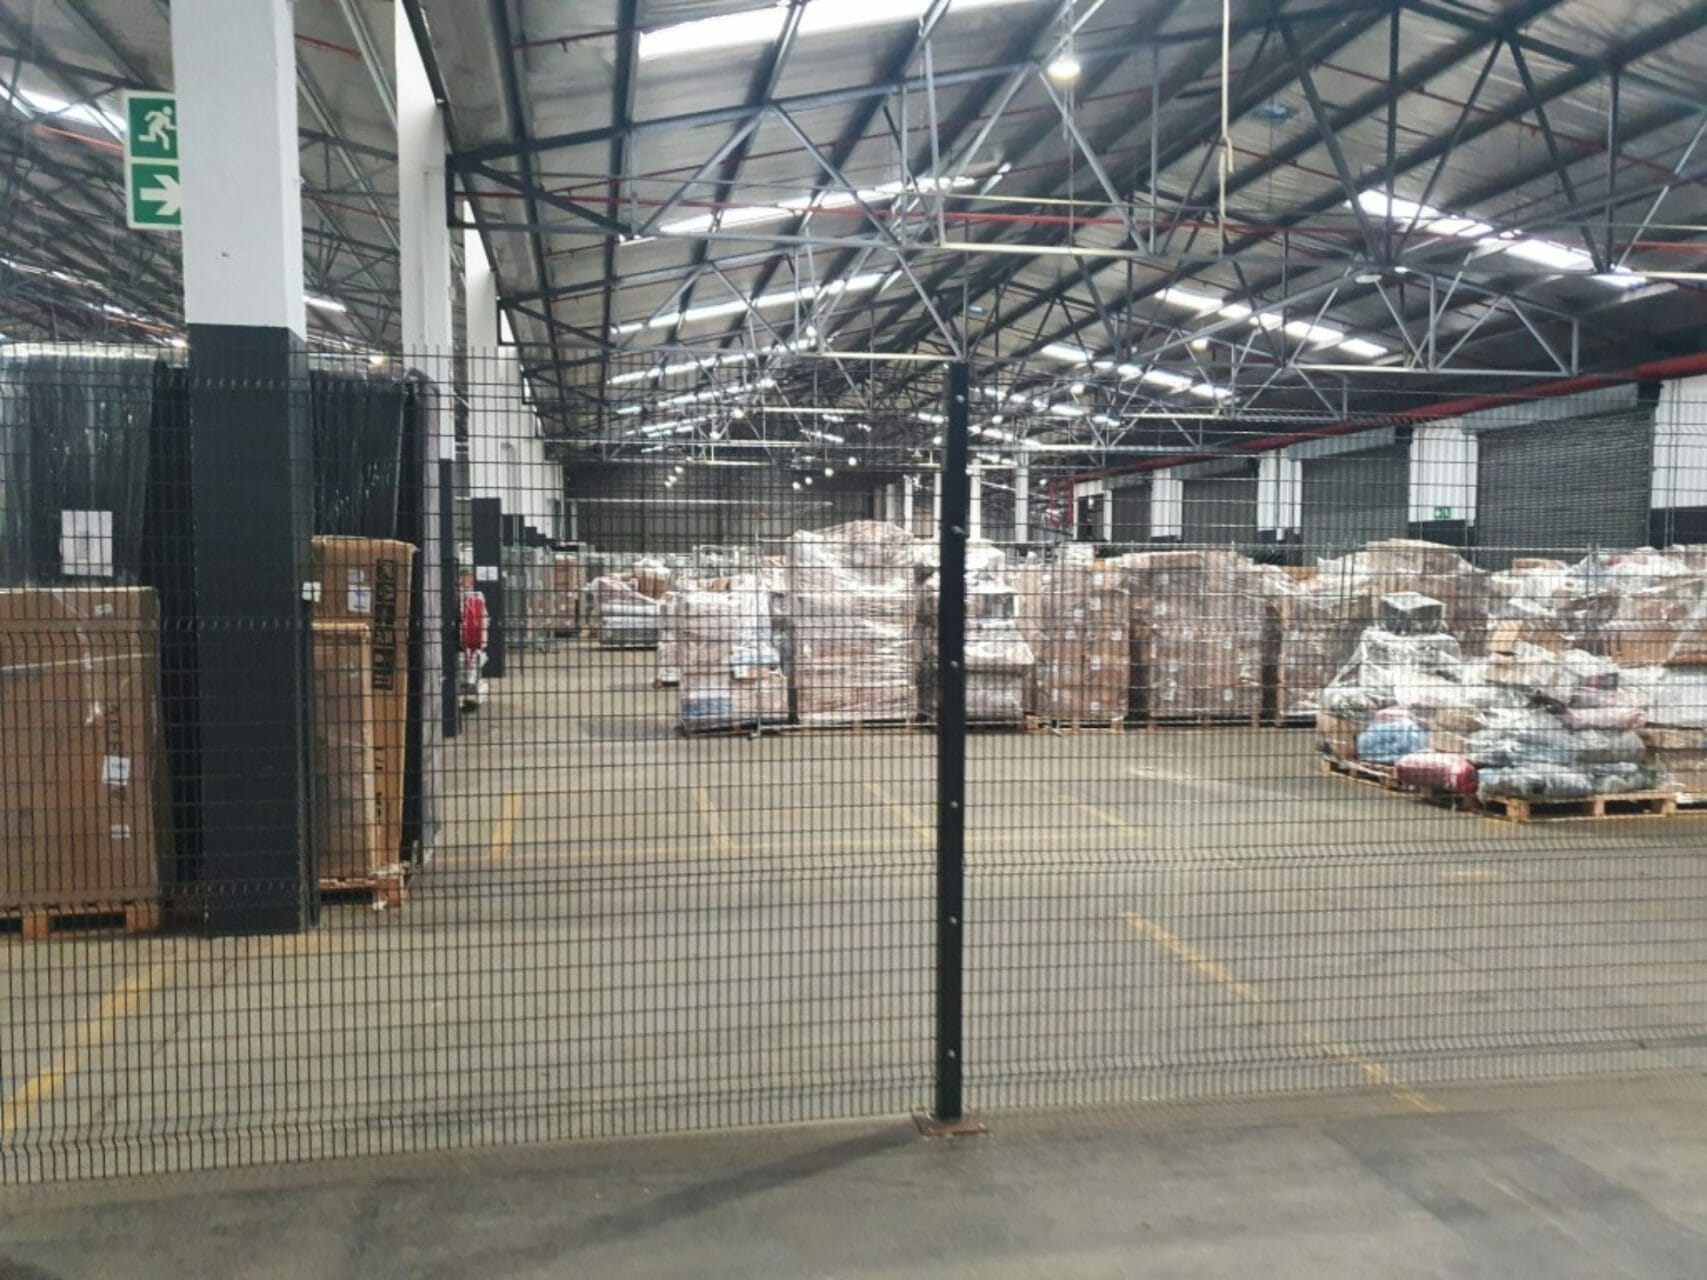 11,991m² Large warehouse / distribution centre available in Chain Avenue Montague Gardens